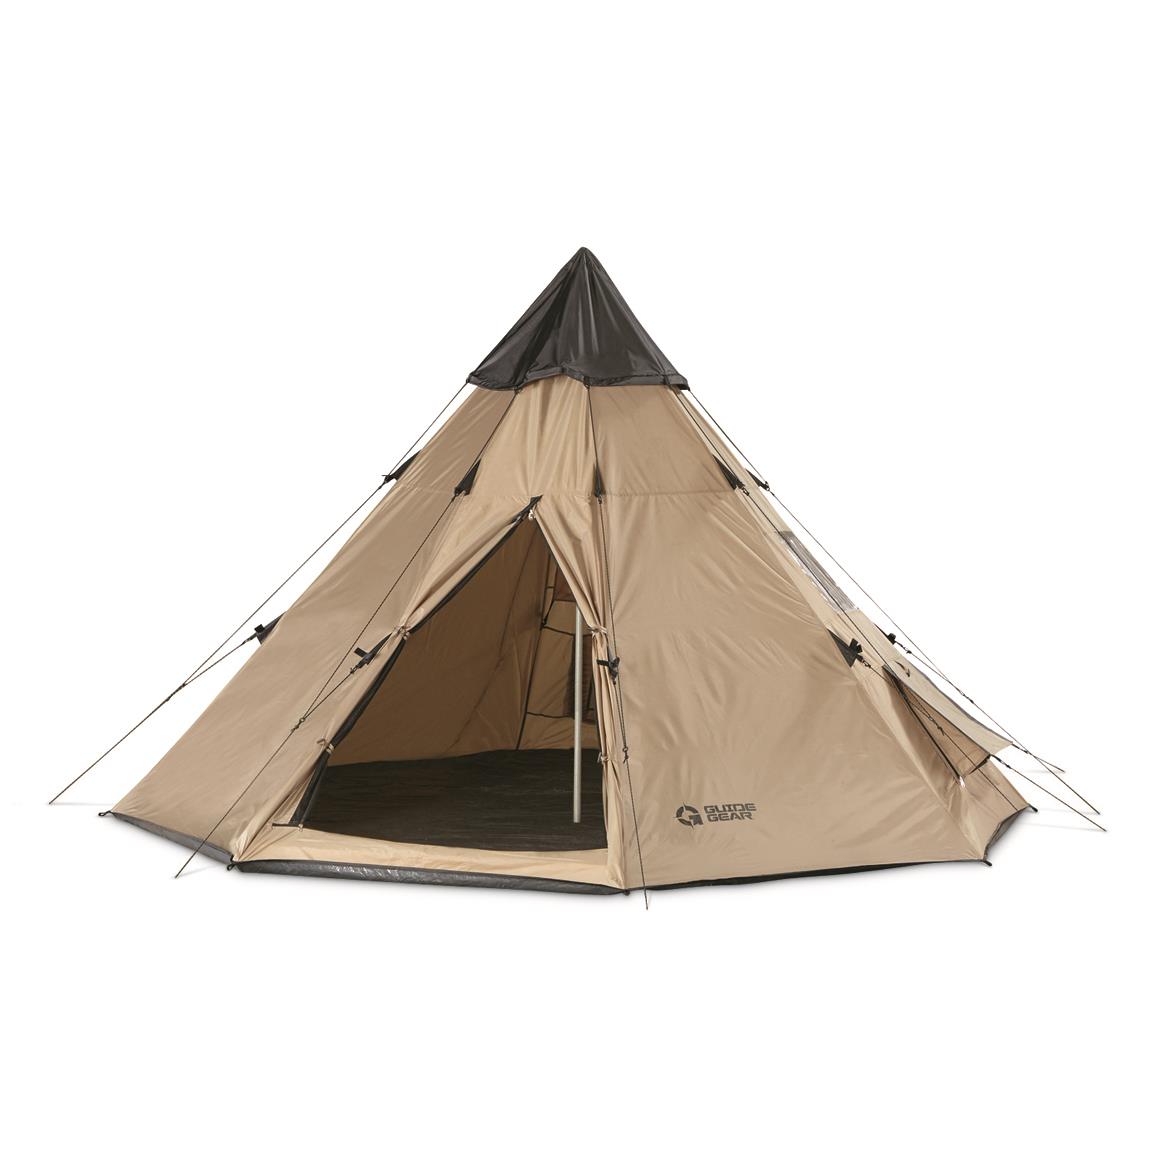 Guide Gear 10' x 10' Teepee Tent